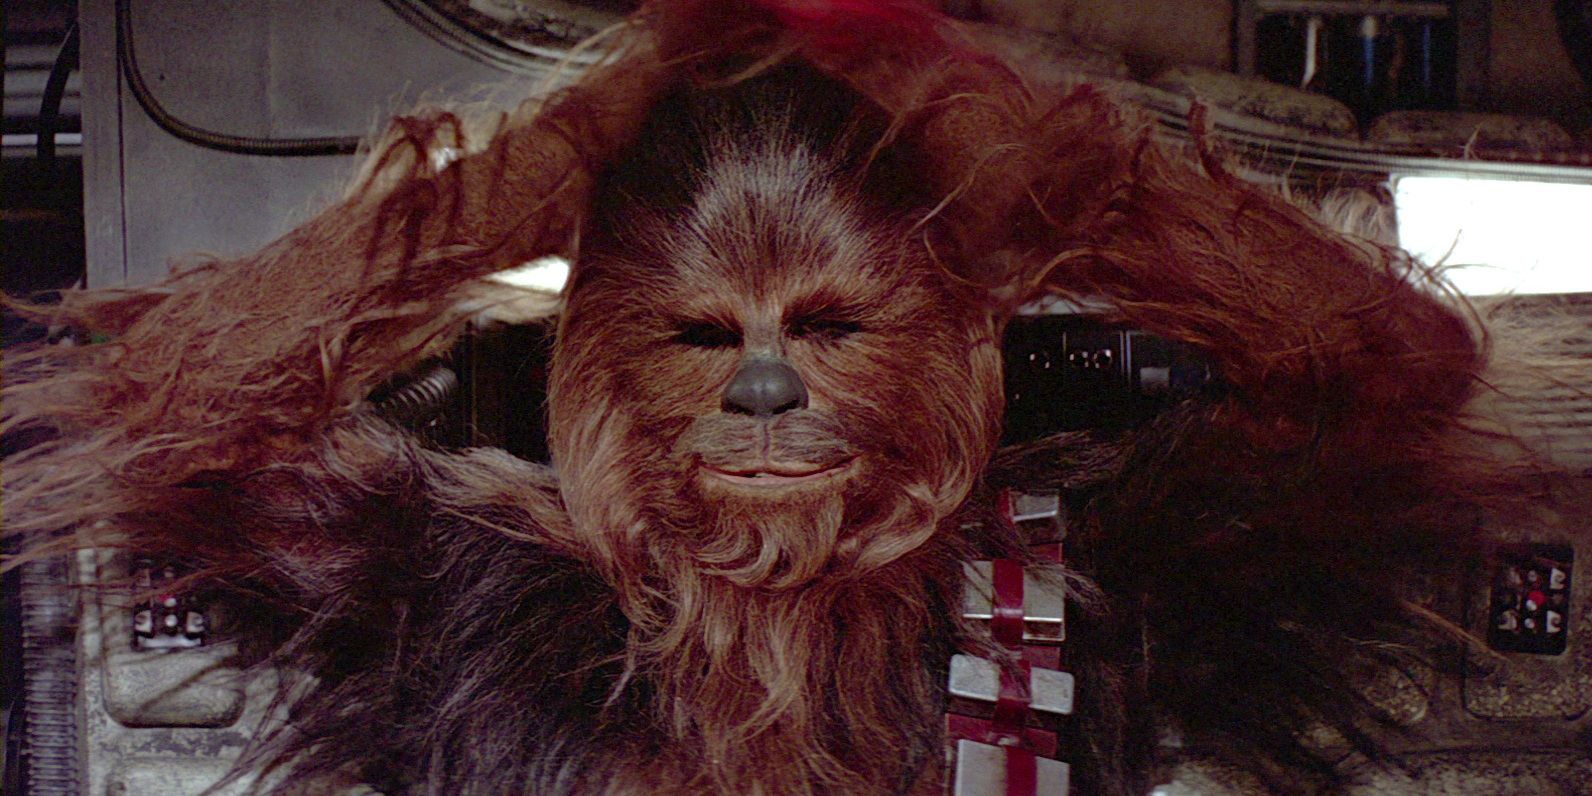 Meet The New Actor Playing Chewbacca Alongside Peter Mayhew